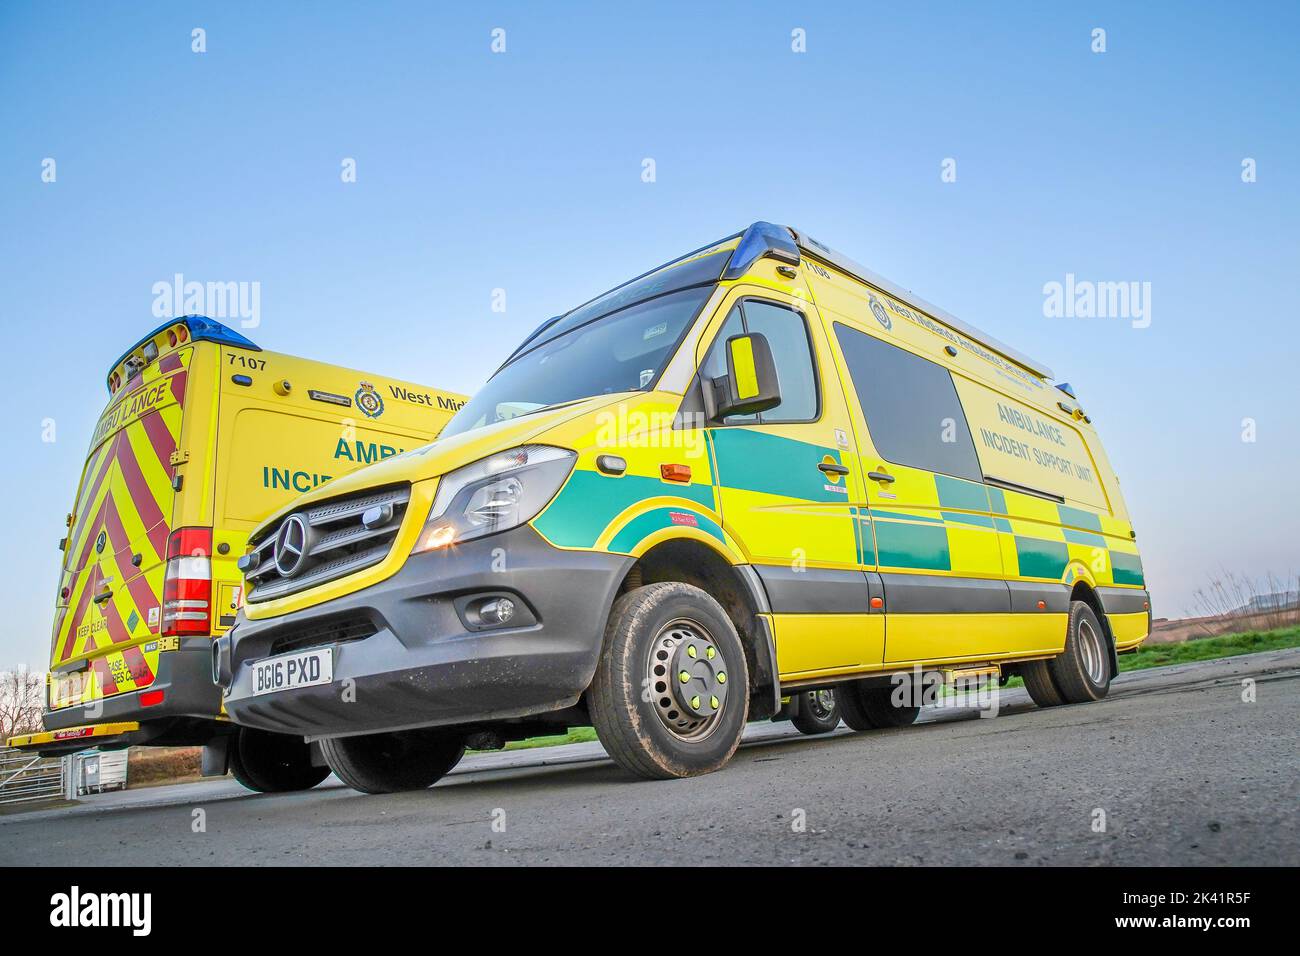 Low angle, front/side view of a West Midlands Ambulance Incident Support Unit vehicle parked outdoors, UK. Stock Photo